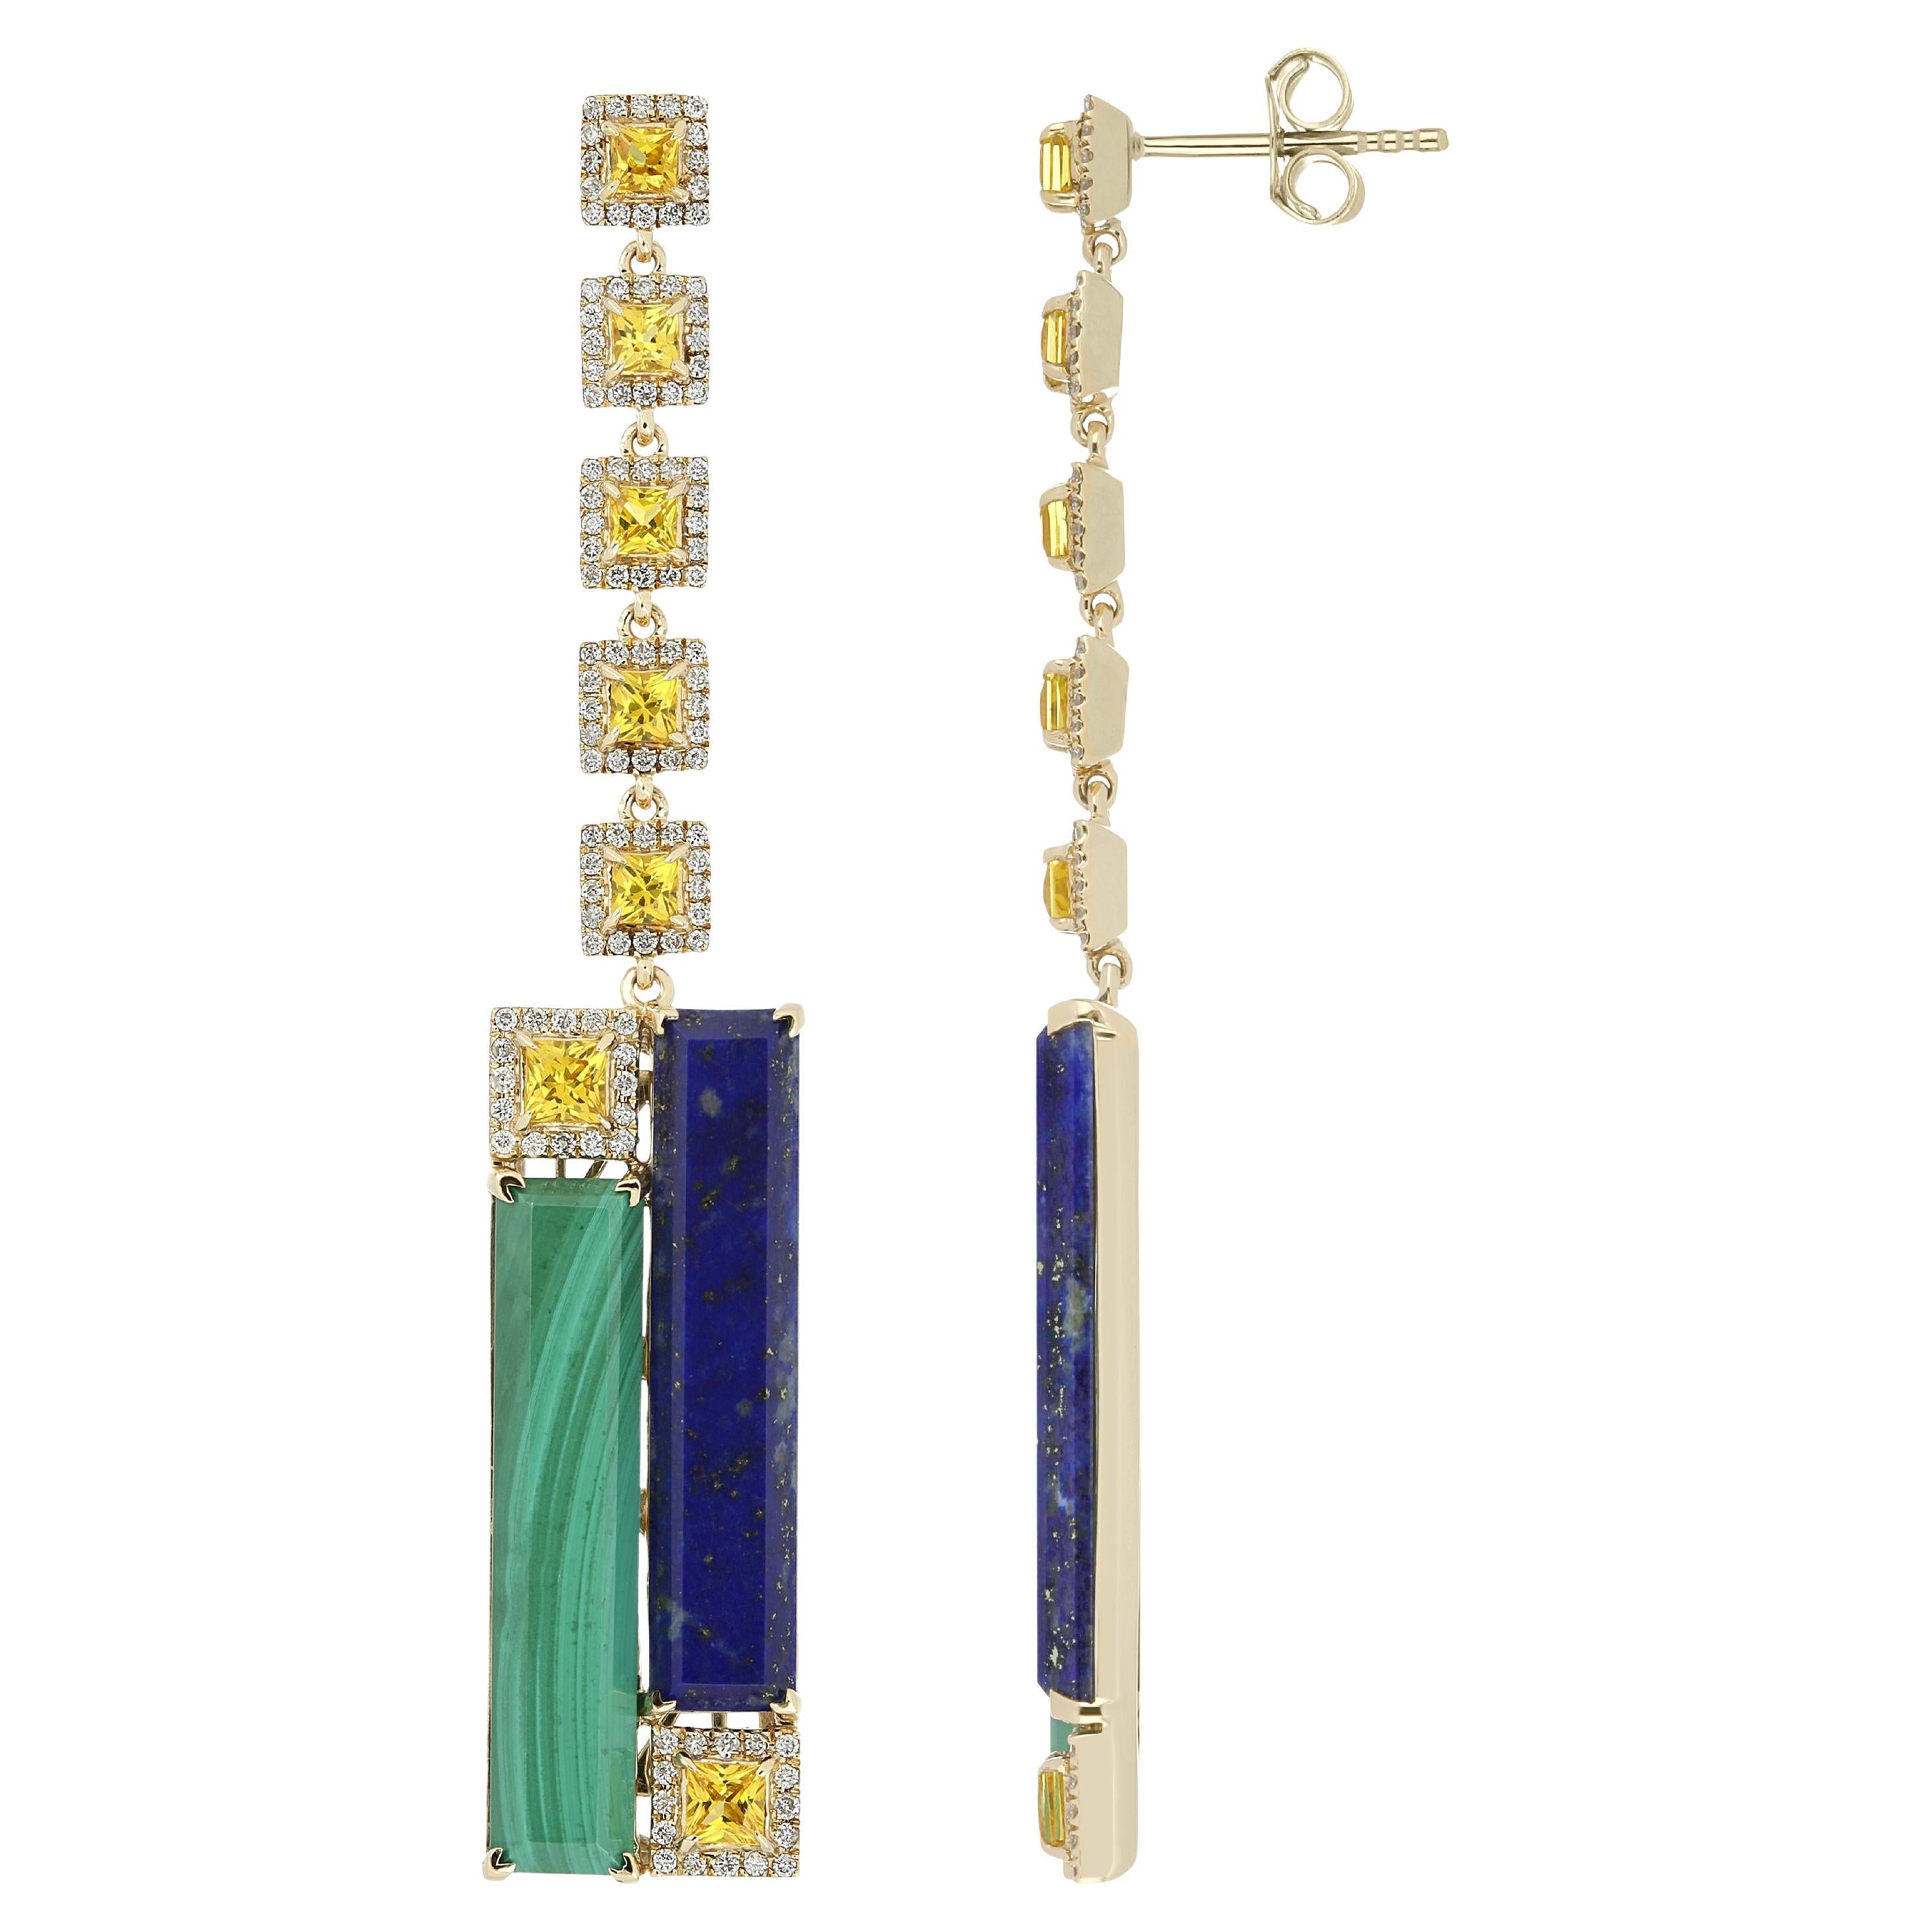 Elegant and exquisitely detailed 14 Karat Yellow Gold Earring, center set with Baguette Shape 7.63 Cts Malachite & 6.08 Cts Lapis Lazuli, accented with Yellow Sapphire weighing approx. 1.75 Cts (total) and micro pave set Diamonds, weighing approx.